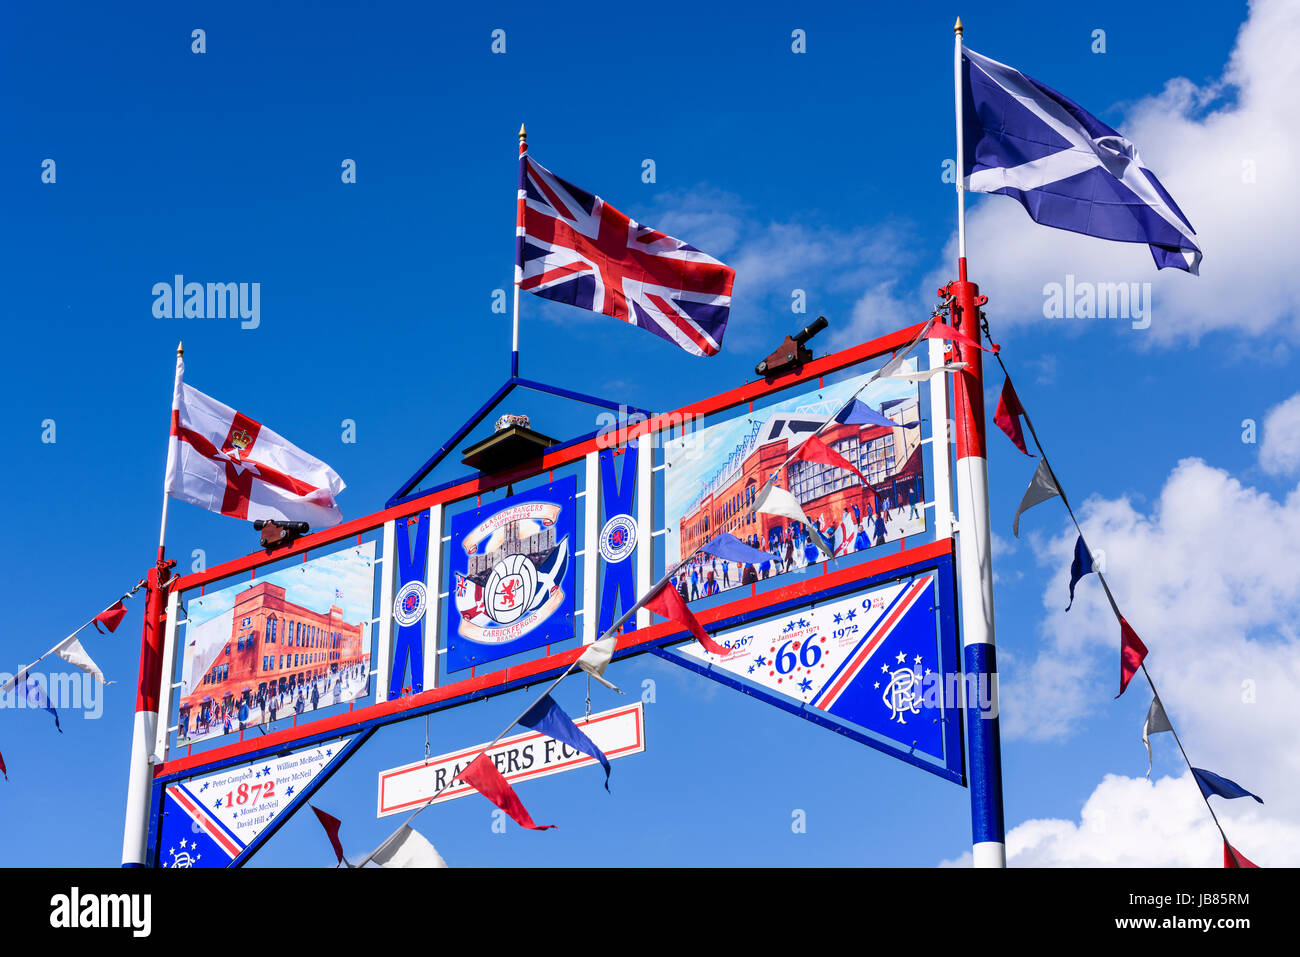 Red white and blue archway commemorating Rangers Football Club with the Northern Ireland, Union and Scottish Saltire flags. Stock Photo